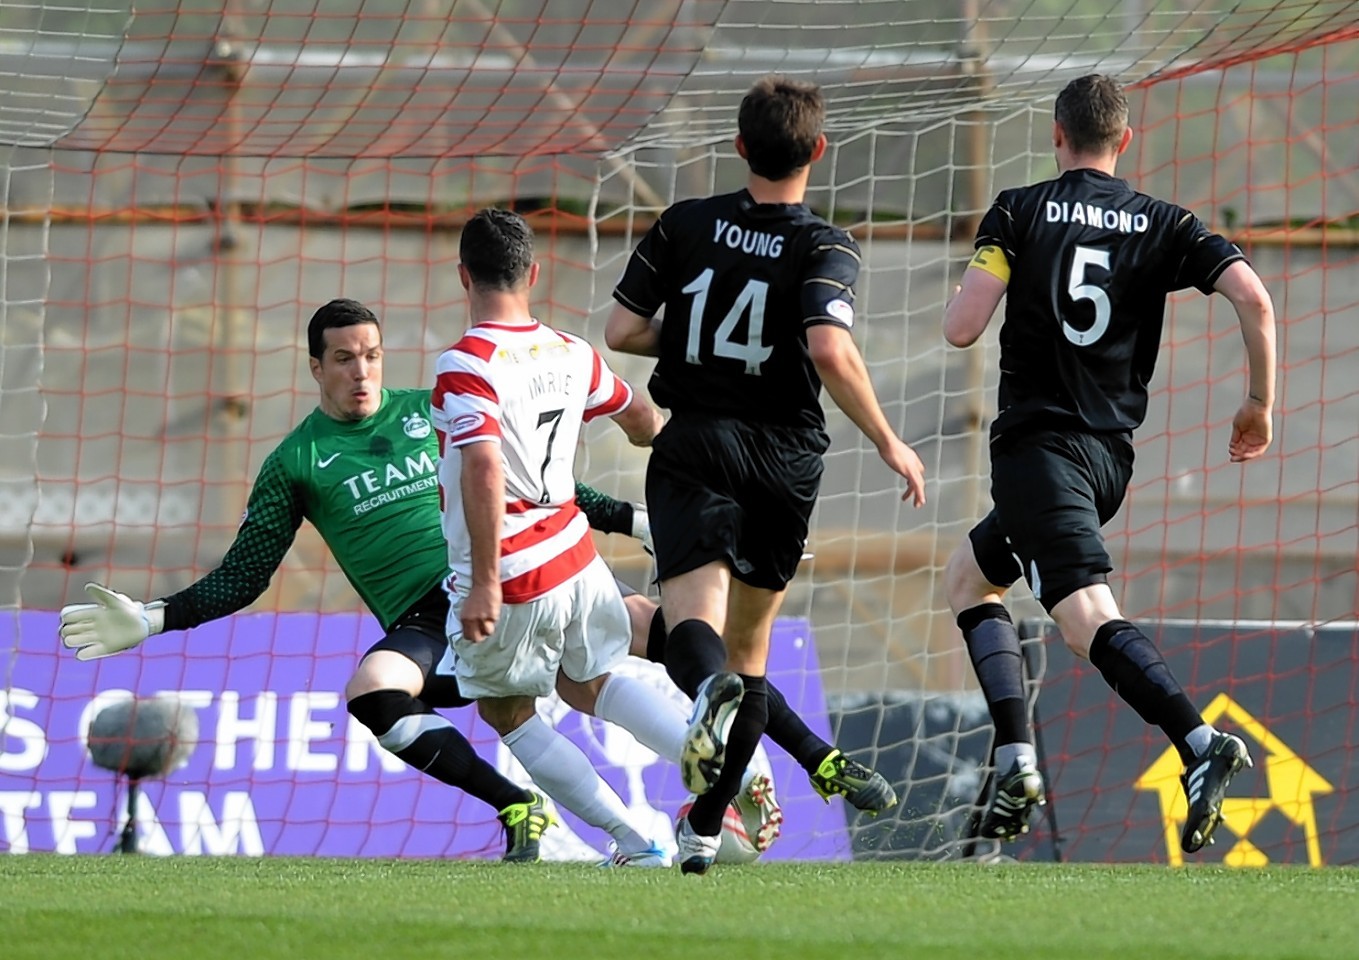 Dougie Imrie nets against the Dons in 2011